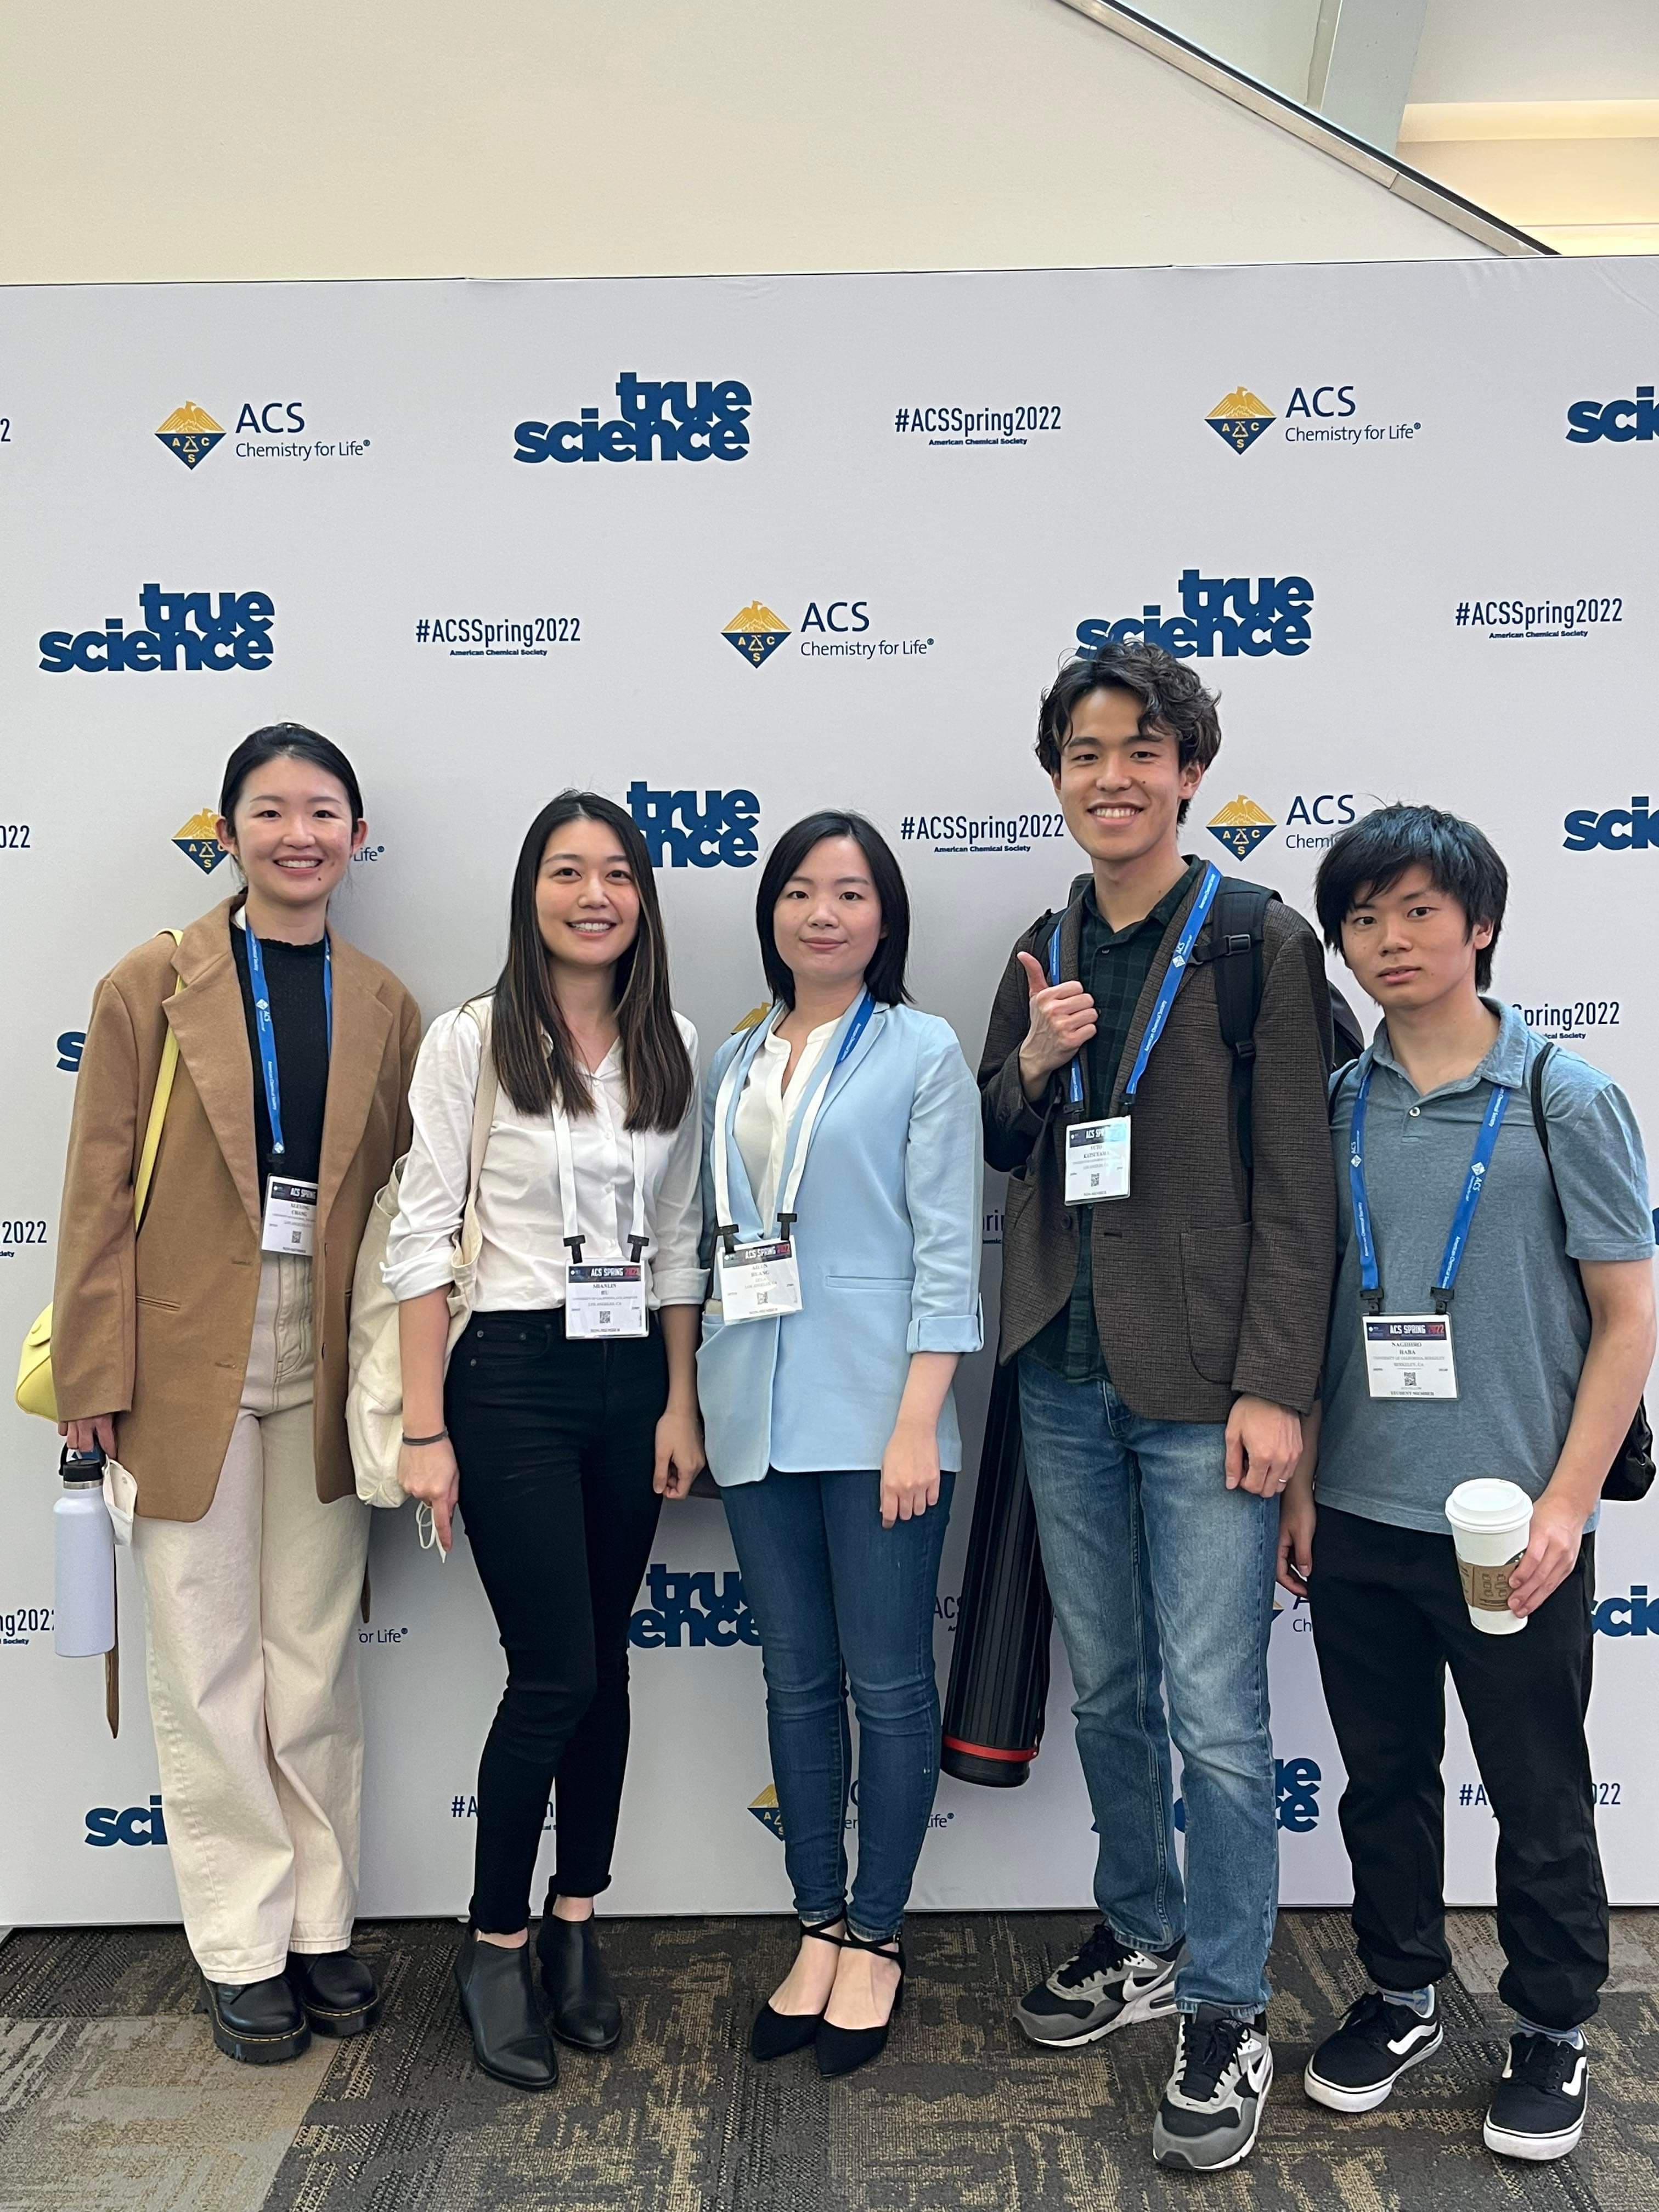 We attended ACS Spring 2022 Meeting in San Diego! to the